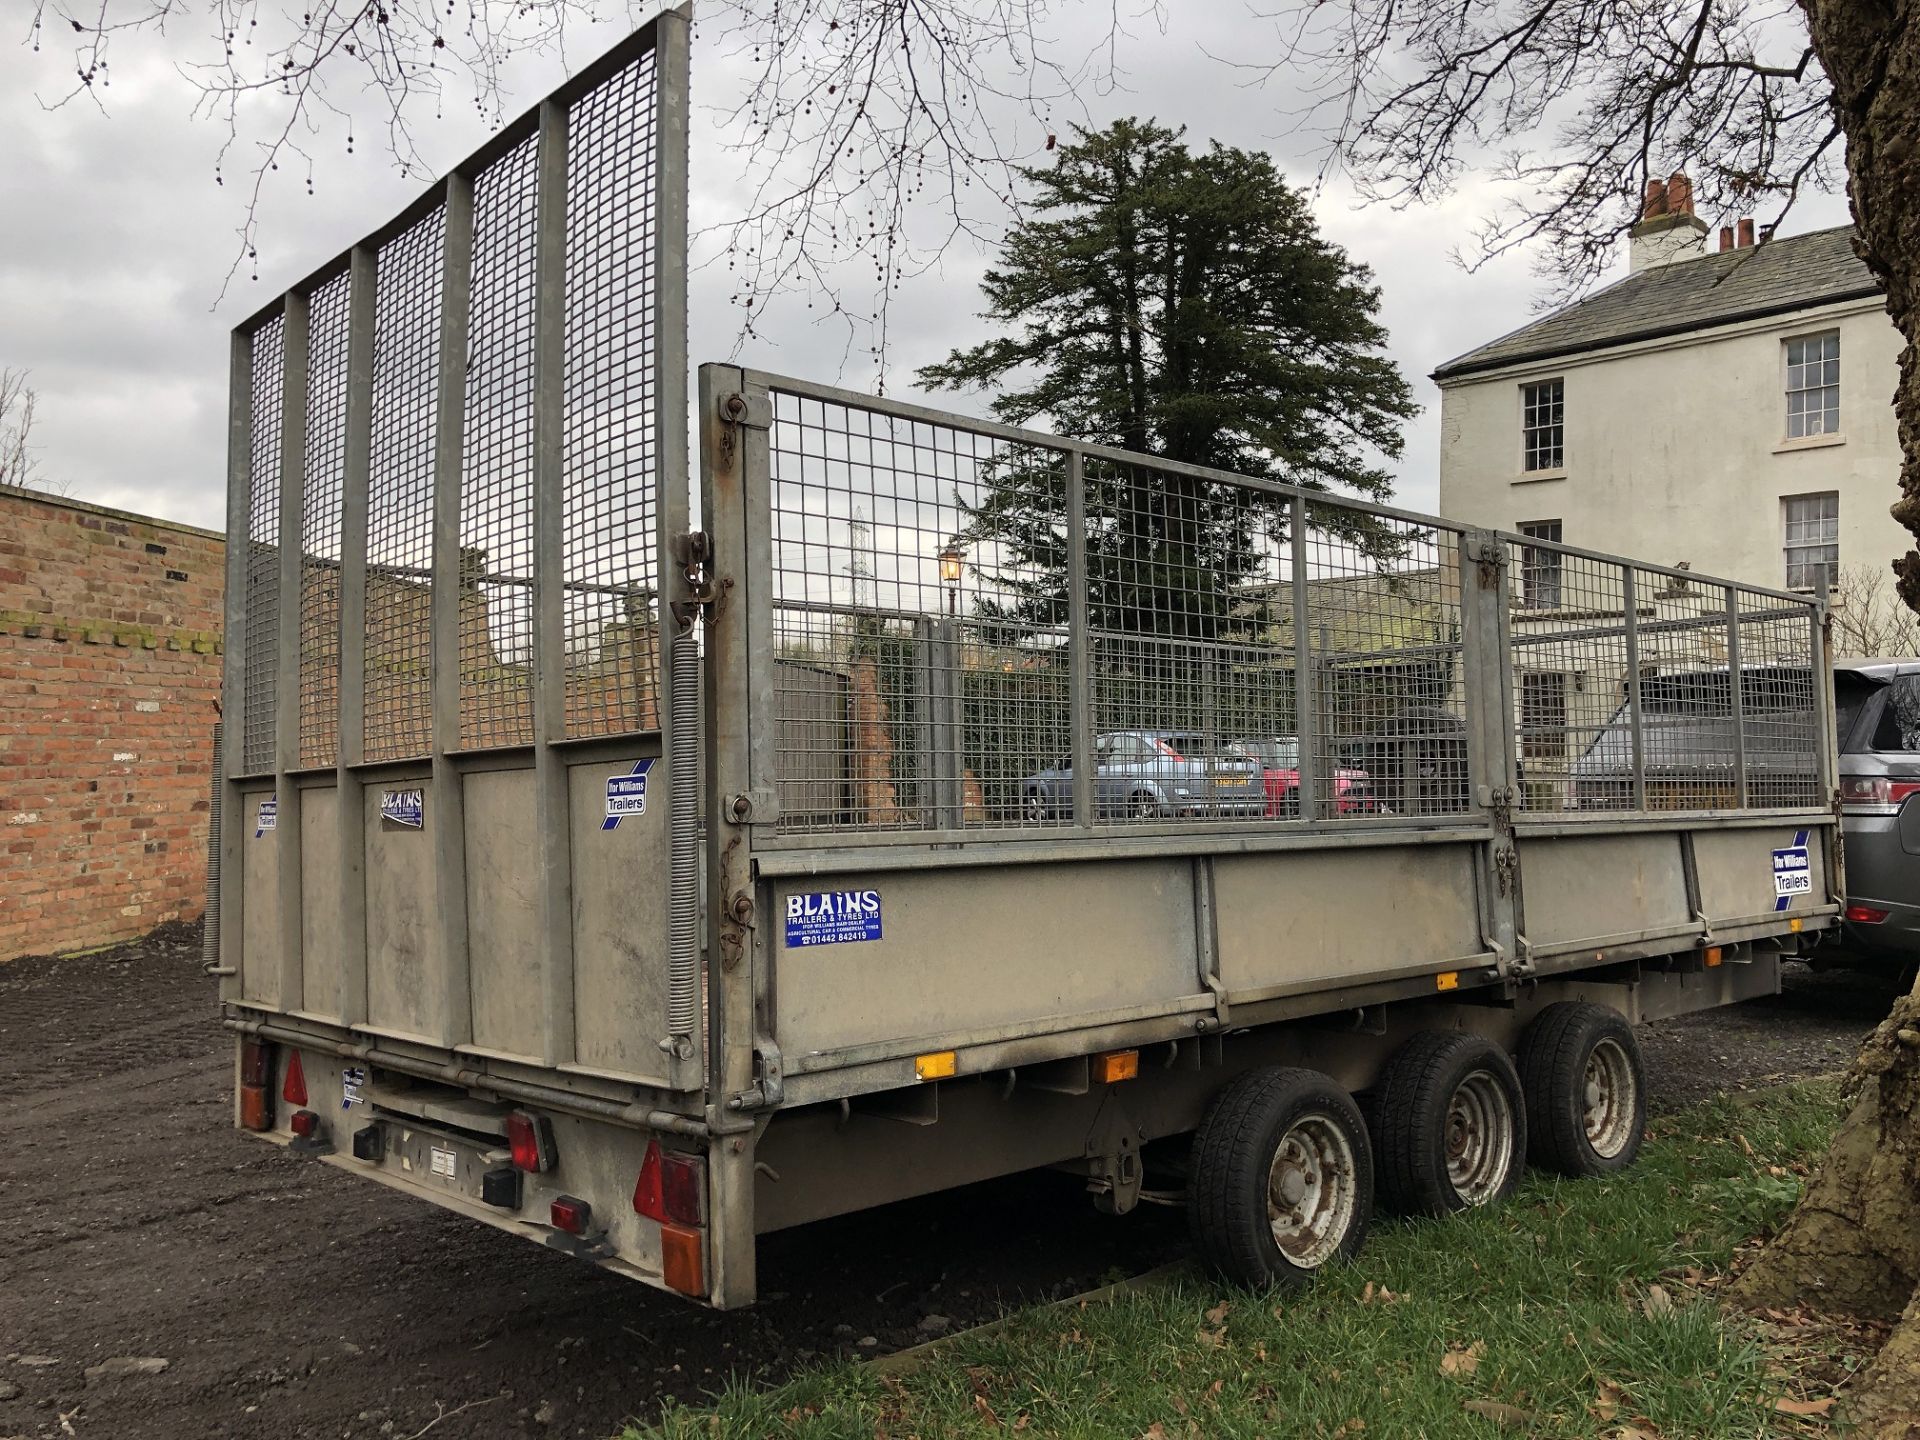 RARE 2005 IFOR WILLIAMS LM167G3 3.5T TRI-AXLE TRAILER ALLOY SIDES, CAGE SIDES AND REAR RAMP - Image 4 of 10